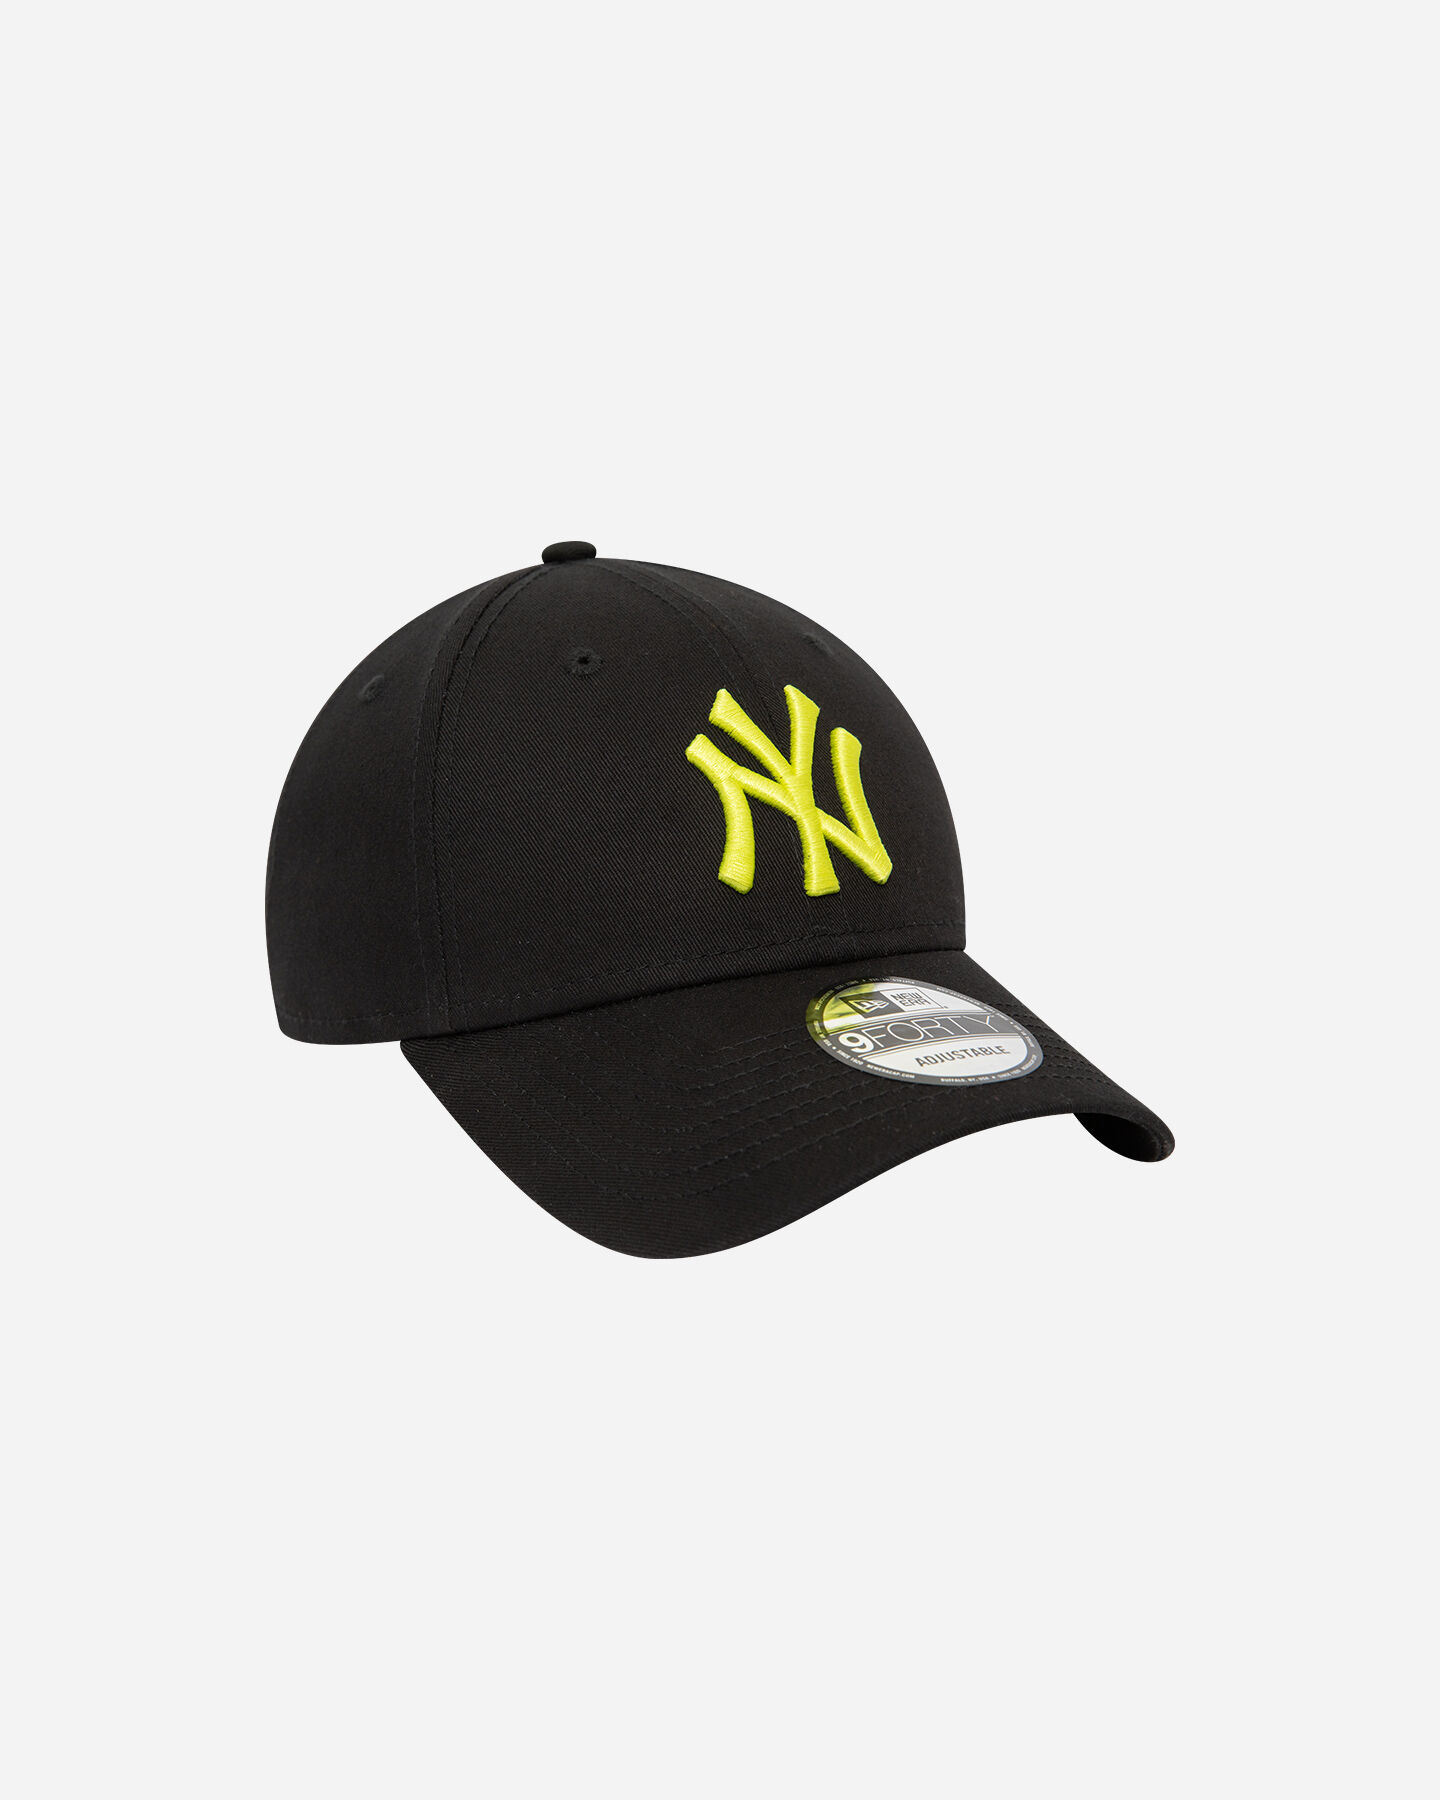  Cappellino NEW ERA 9FORTY MLB LEAGUE ESSENTIAL NEW YORK YANKEES M S5671048|001|OSFM scatto 2